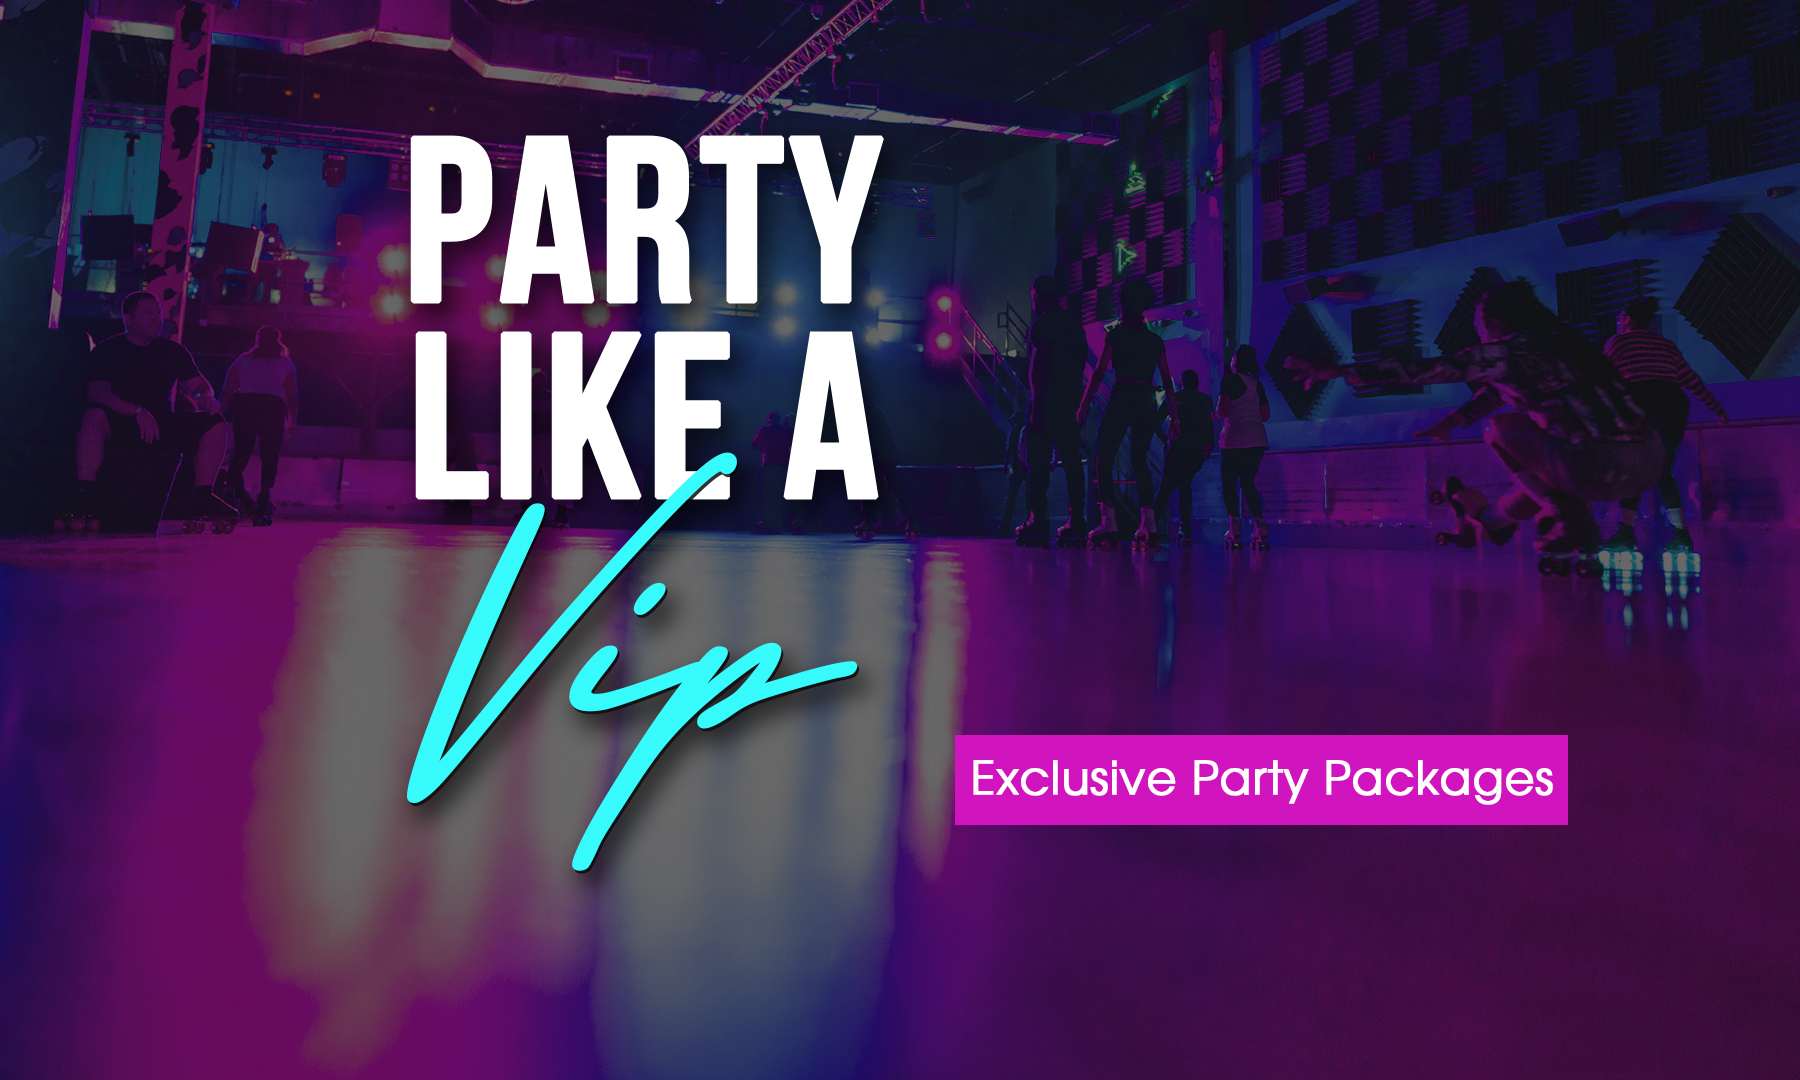 Party like a VIP